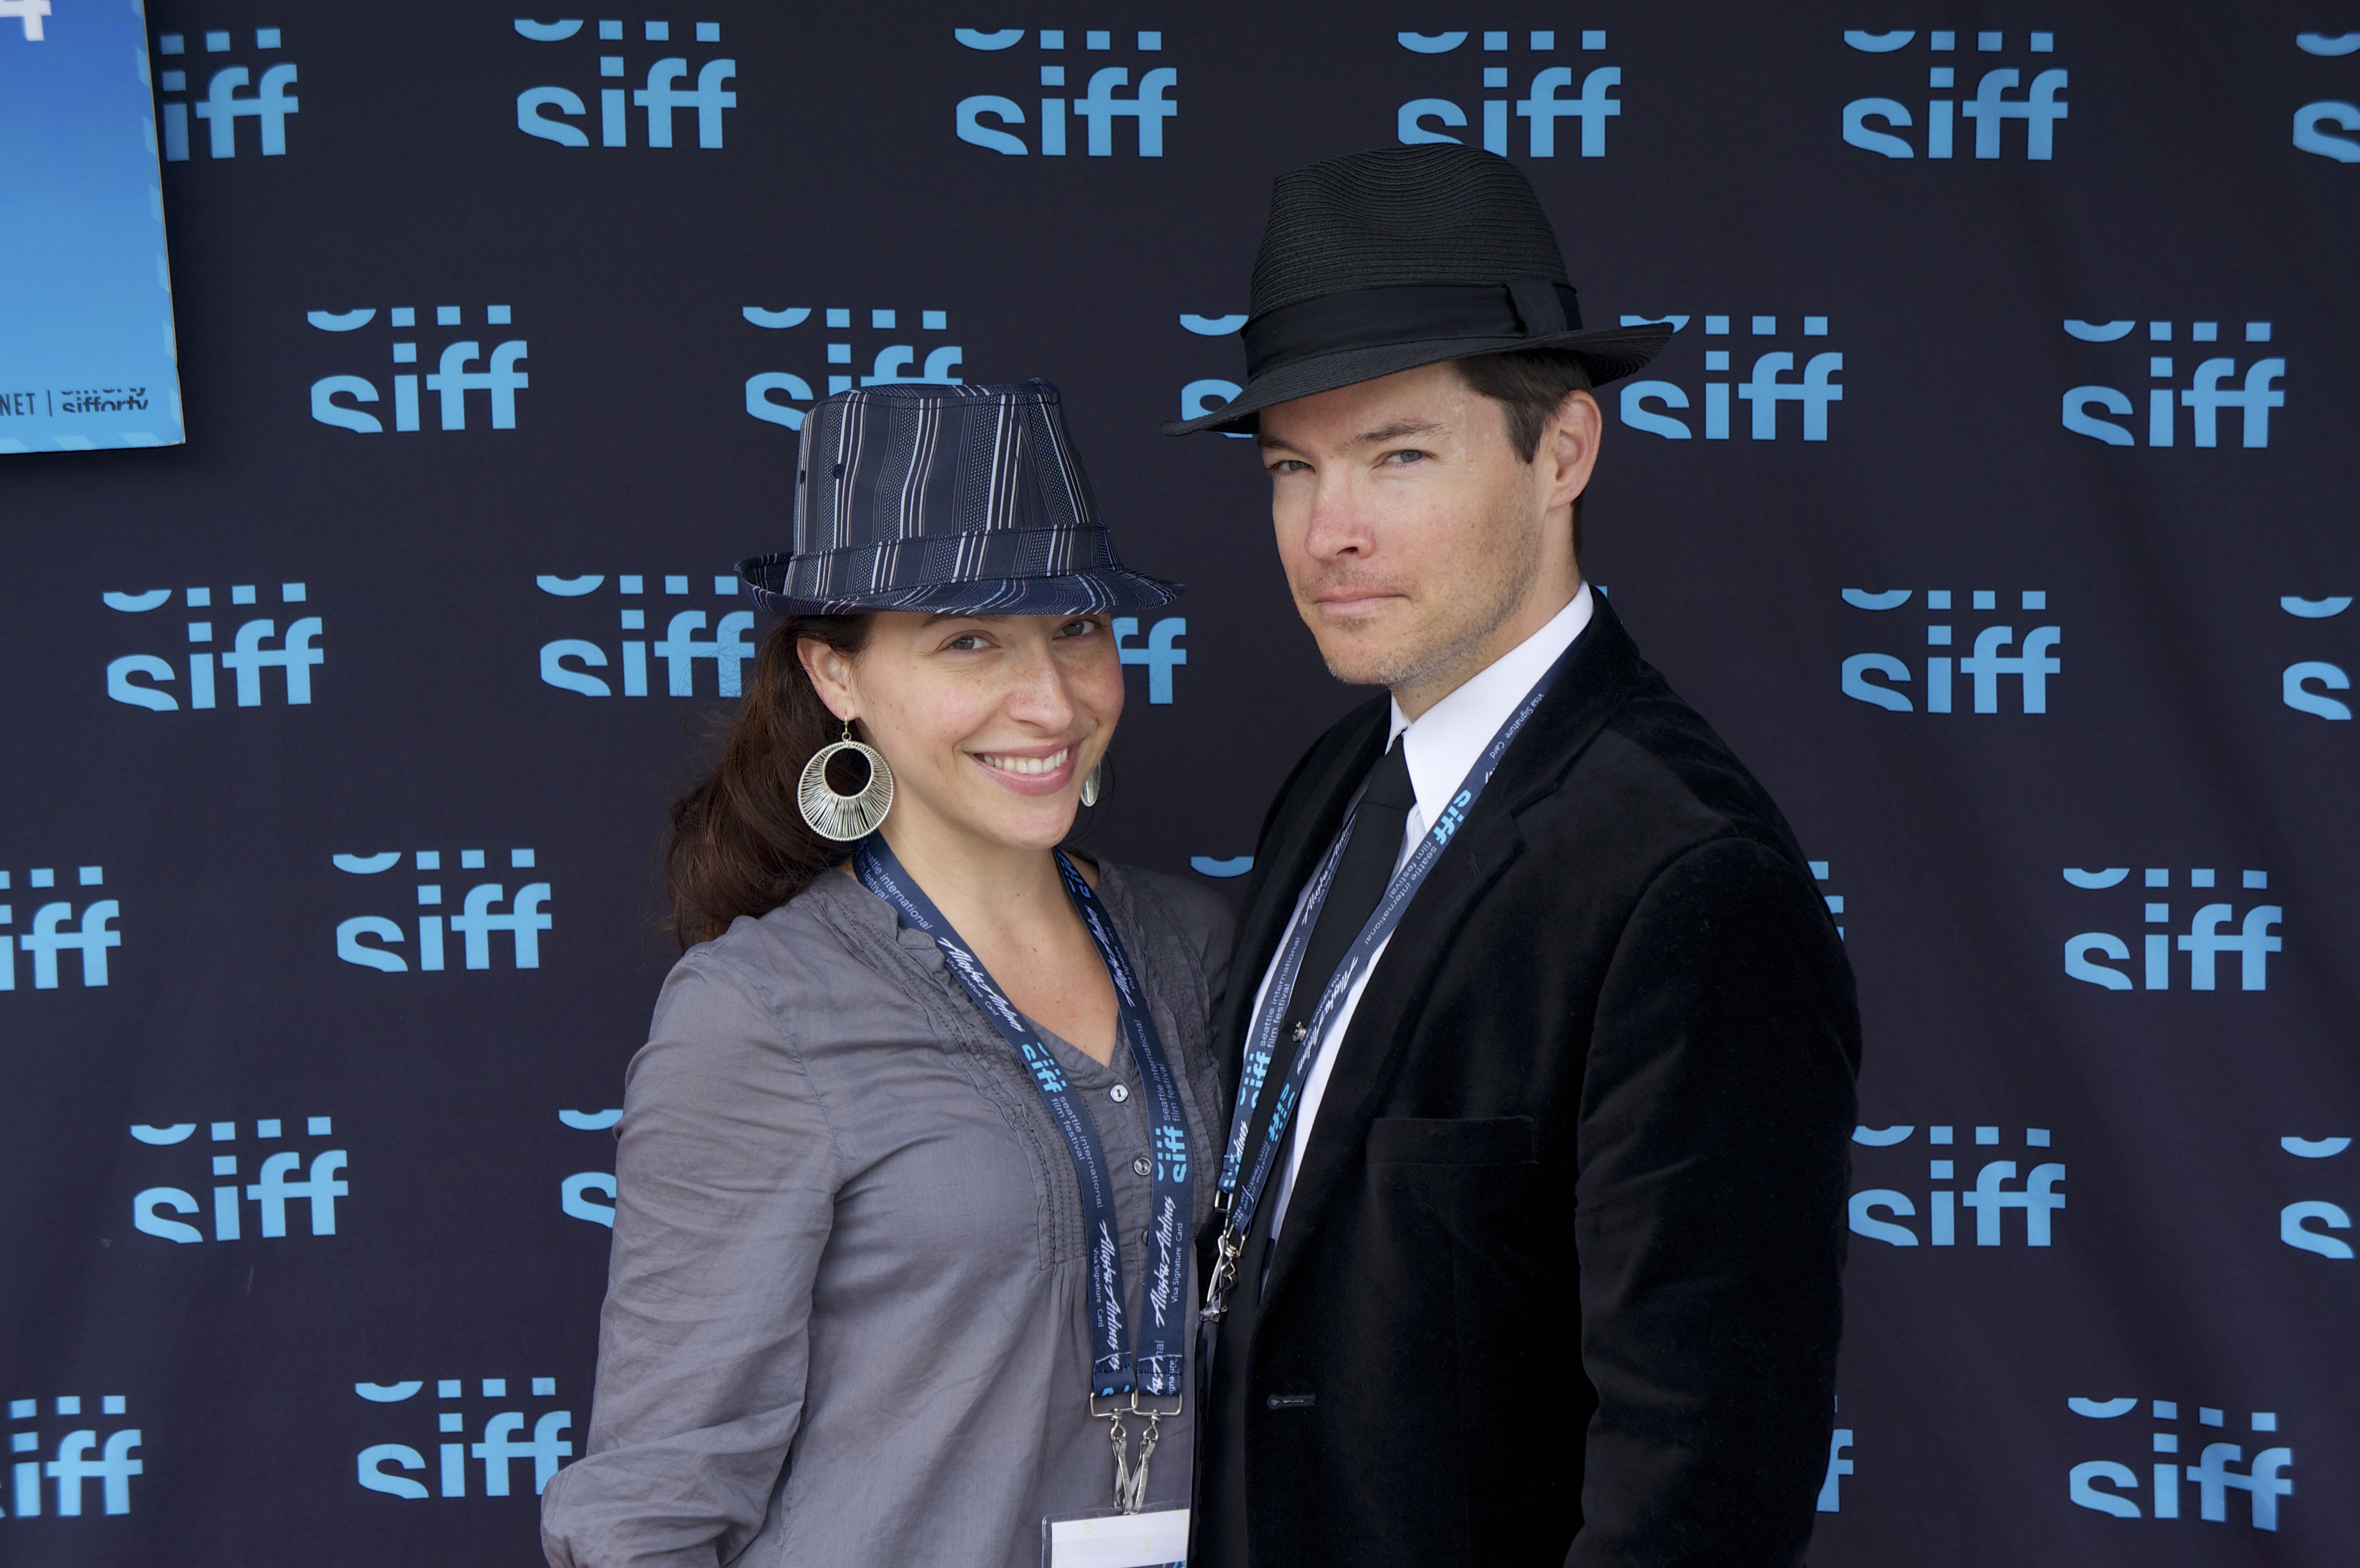 Angela DiMarco and David S. Hogan at the SIFF premiere of The Maury Island Incident (2014).